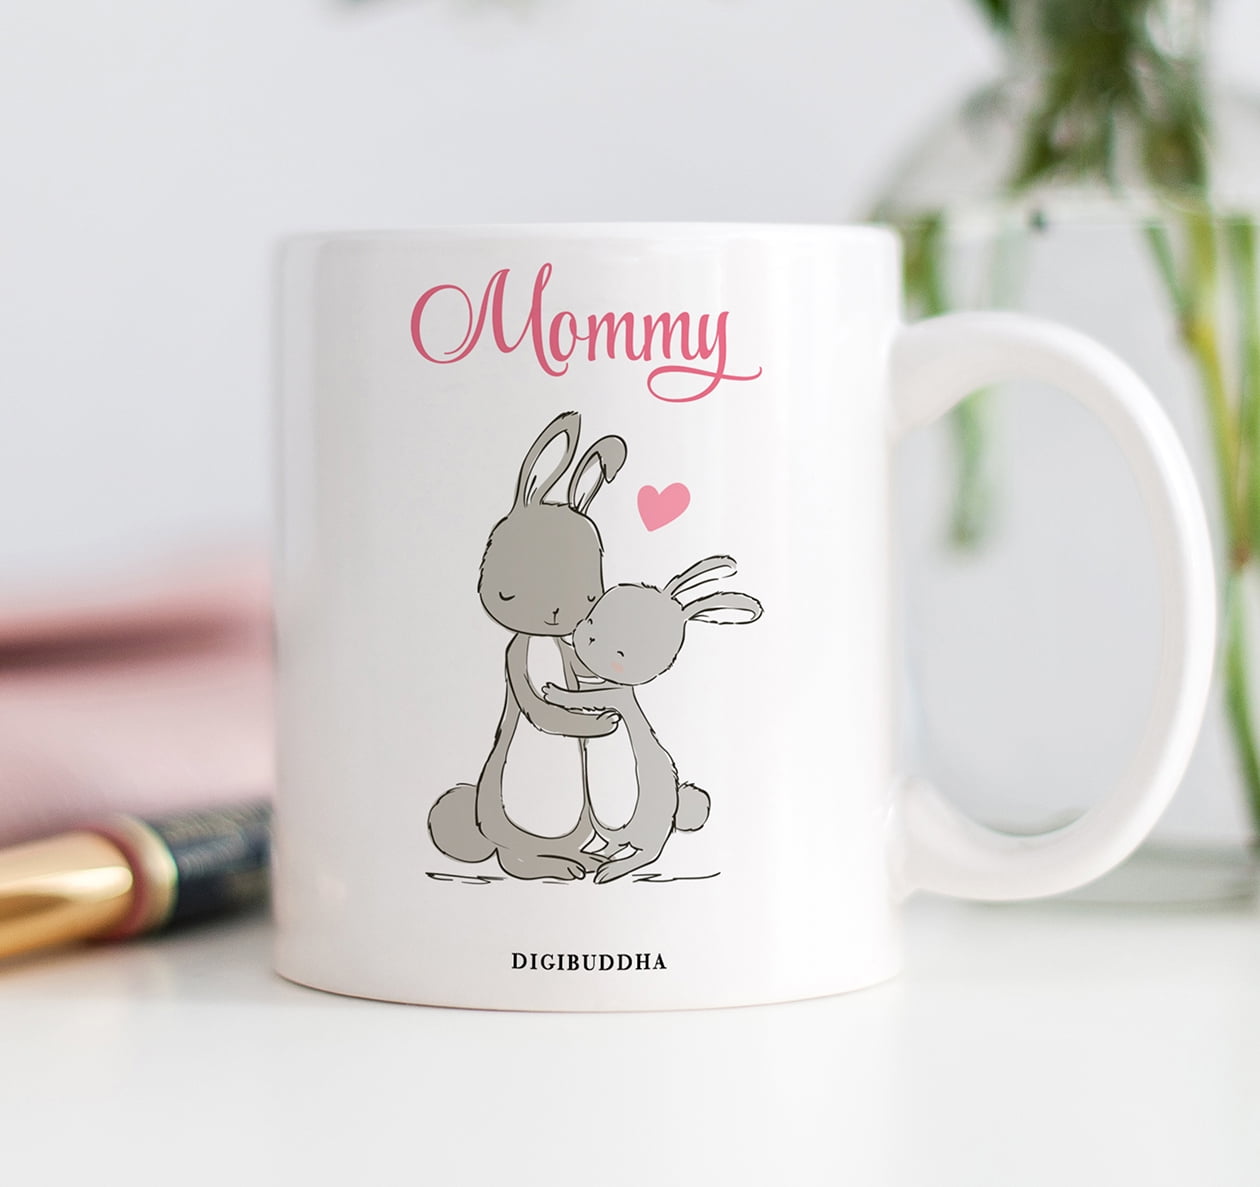 Parent Expecting New Baby Mum To Be Personalised Me to You Mug Baby Shower